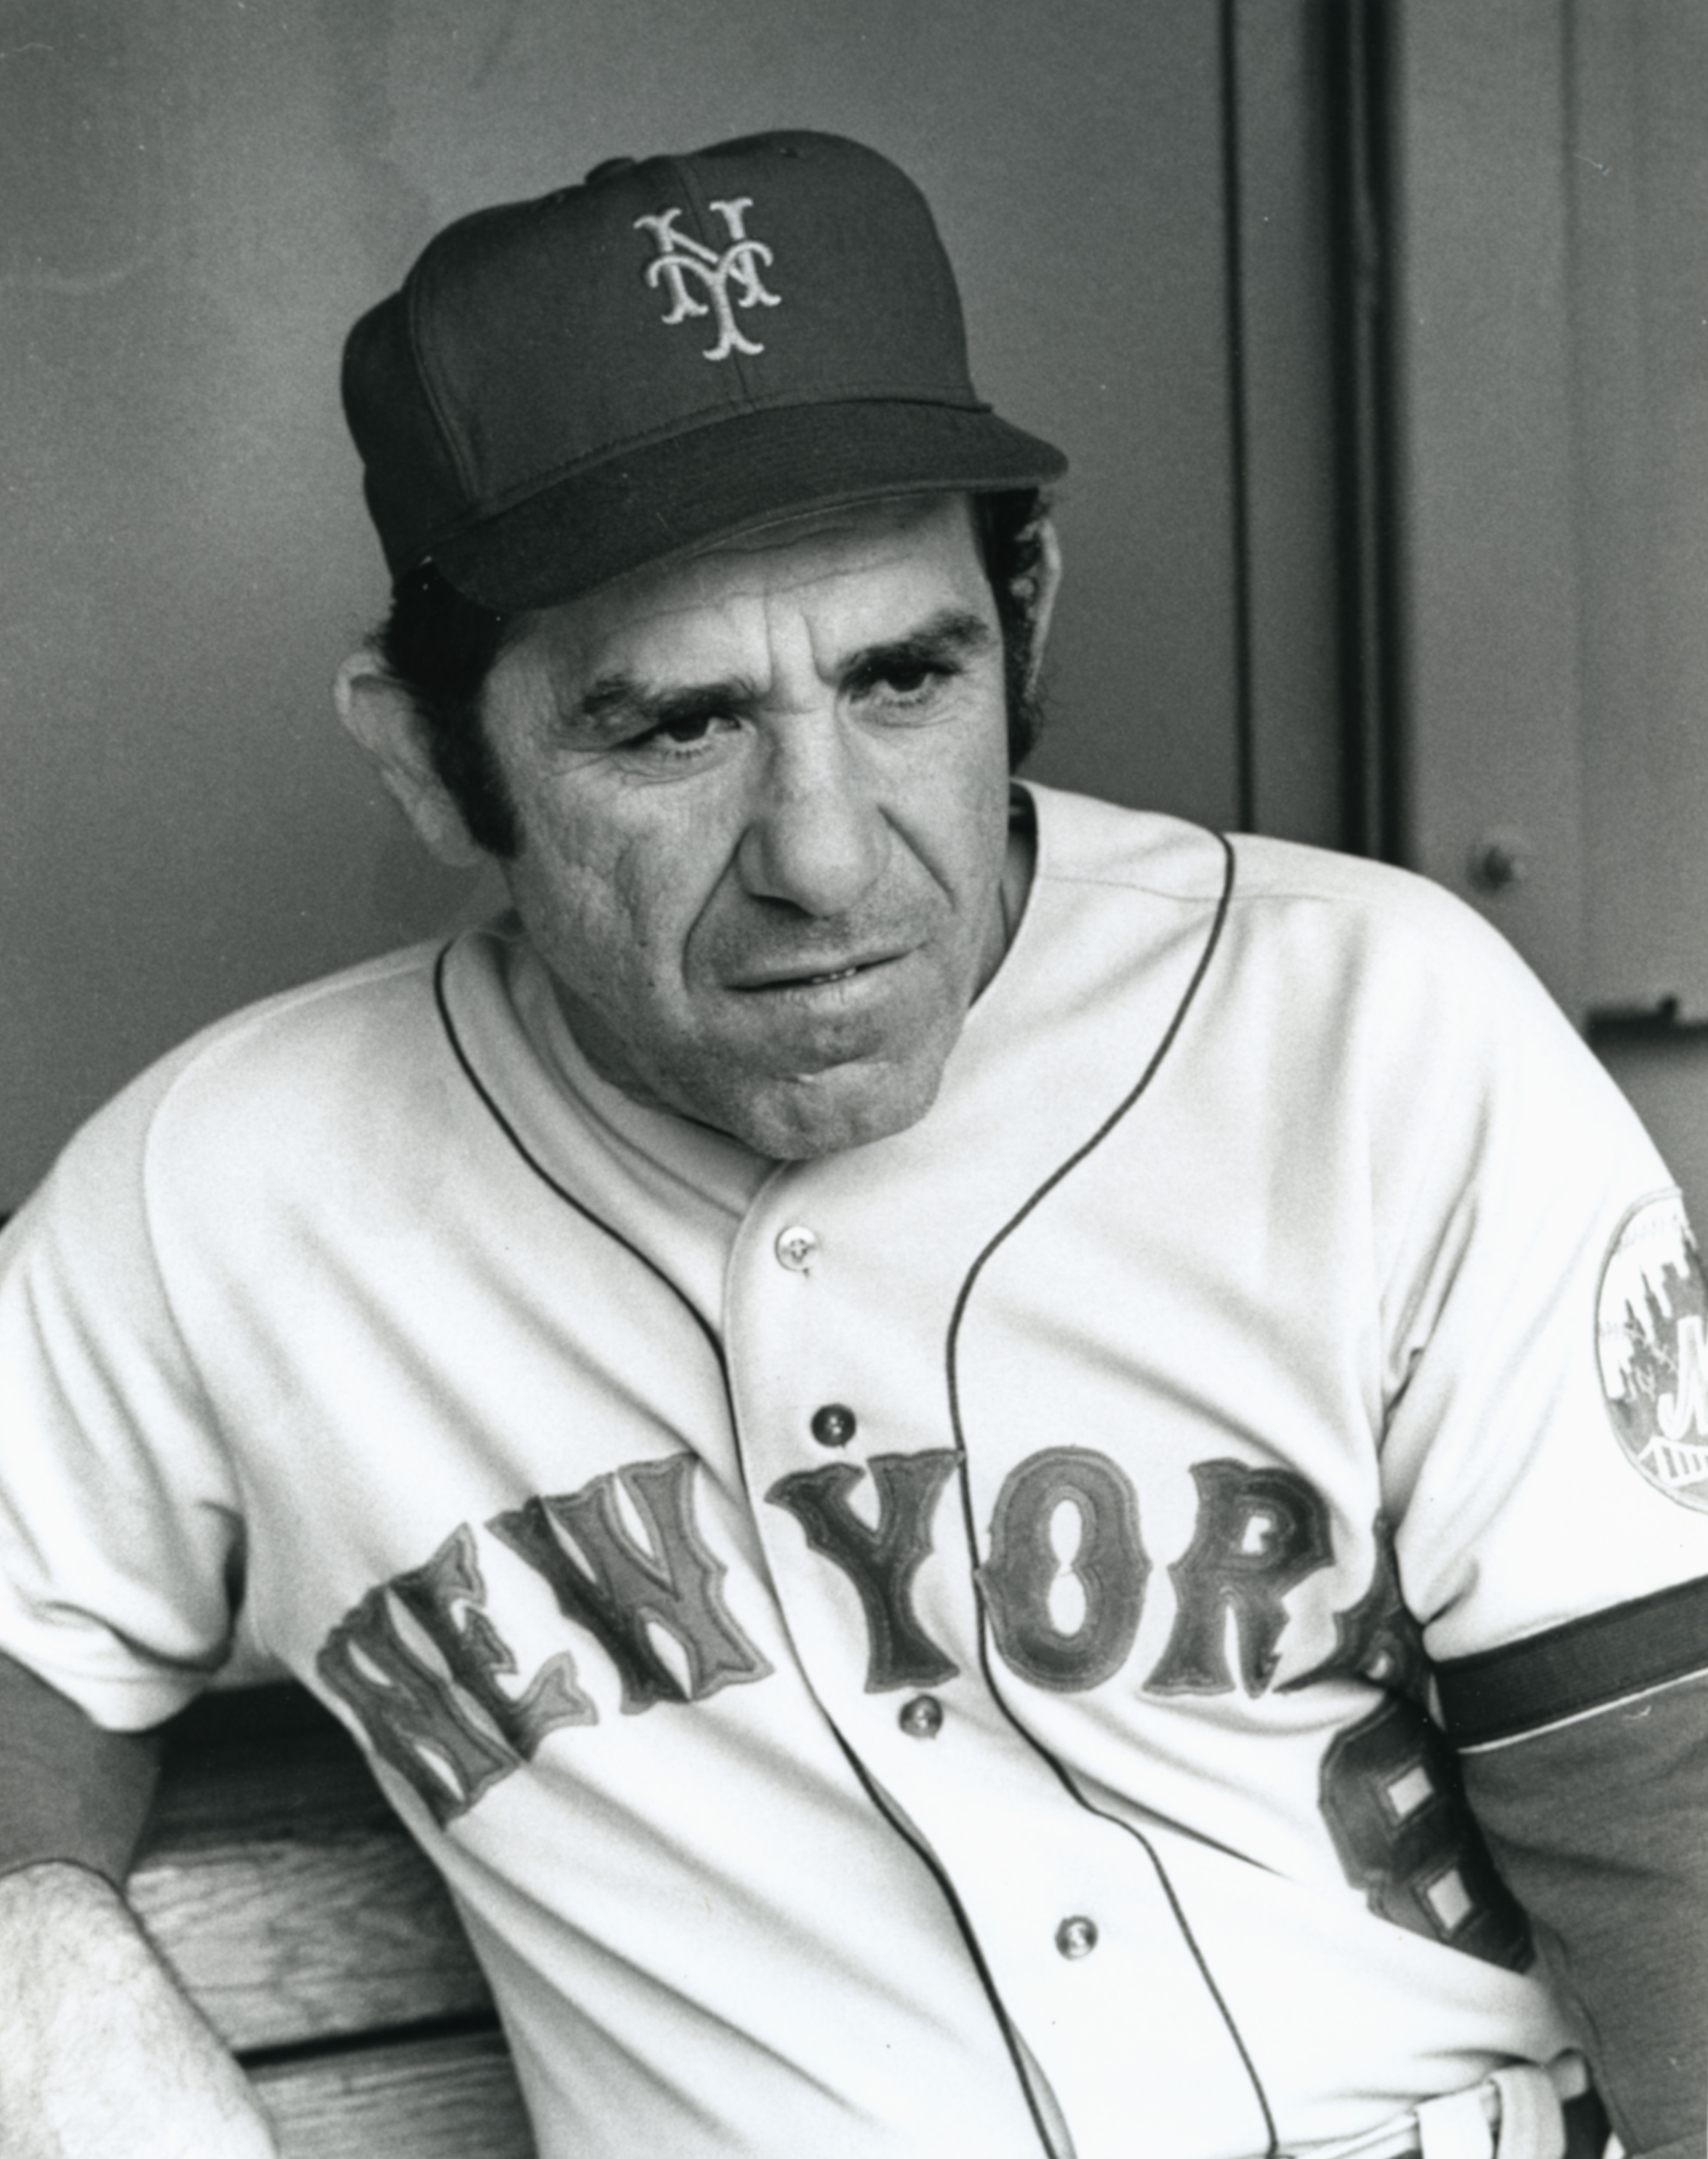 Yogi Berra signed with Mets 55 years ago